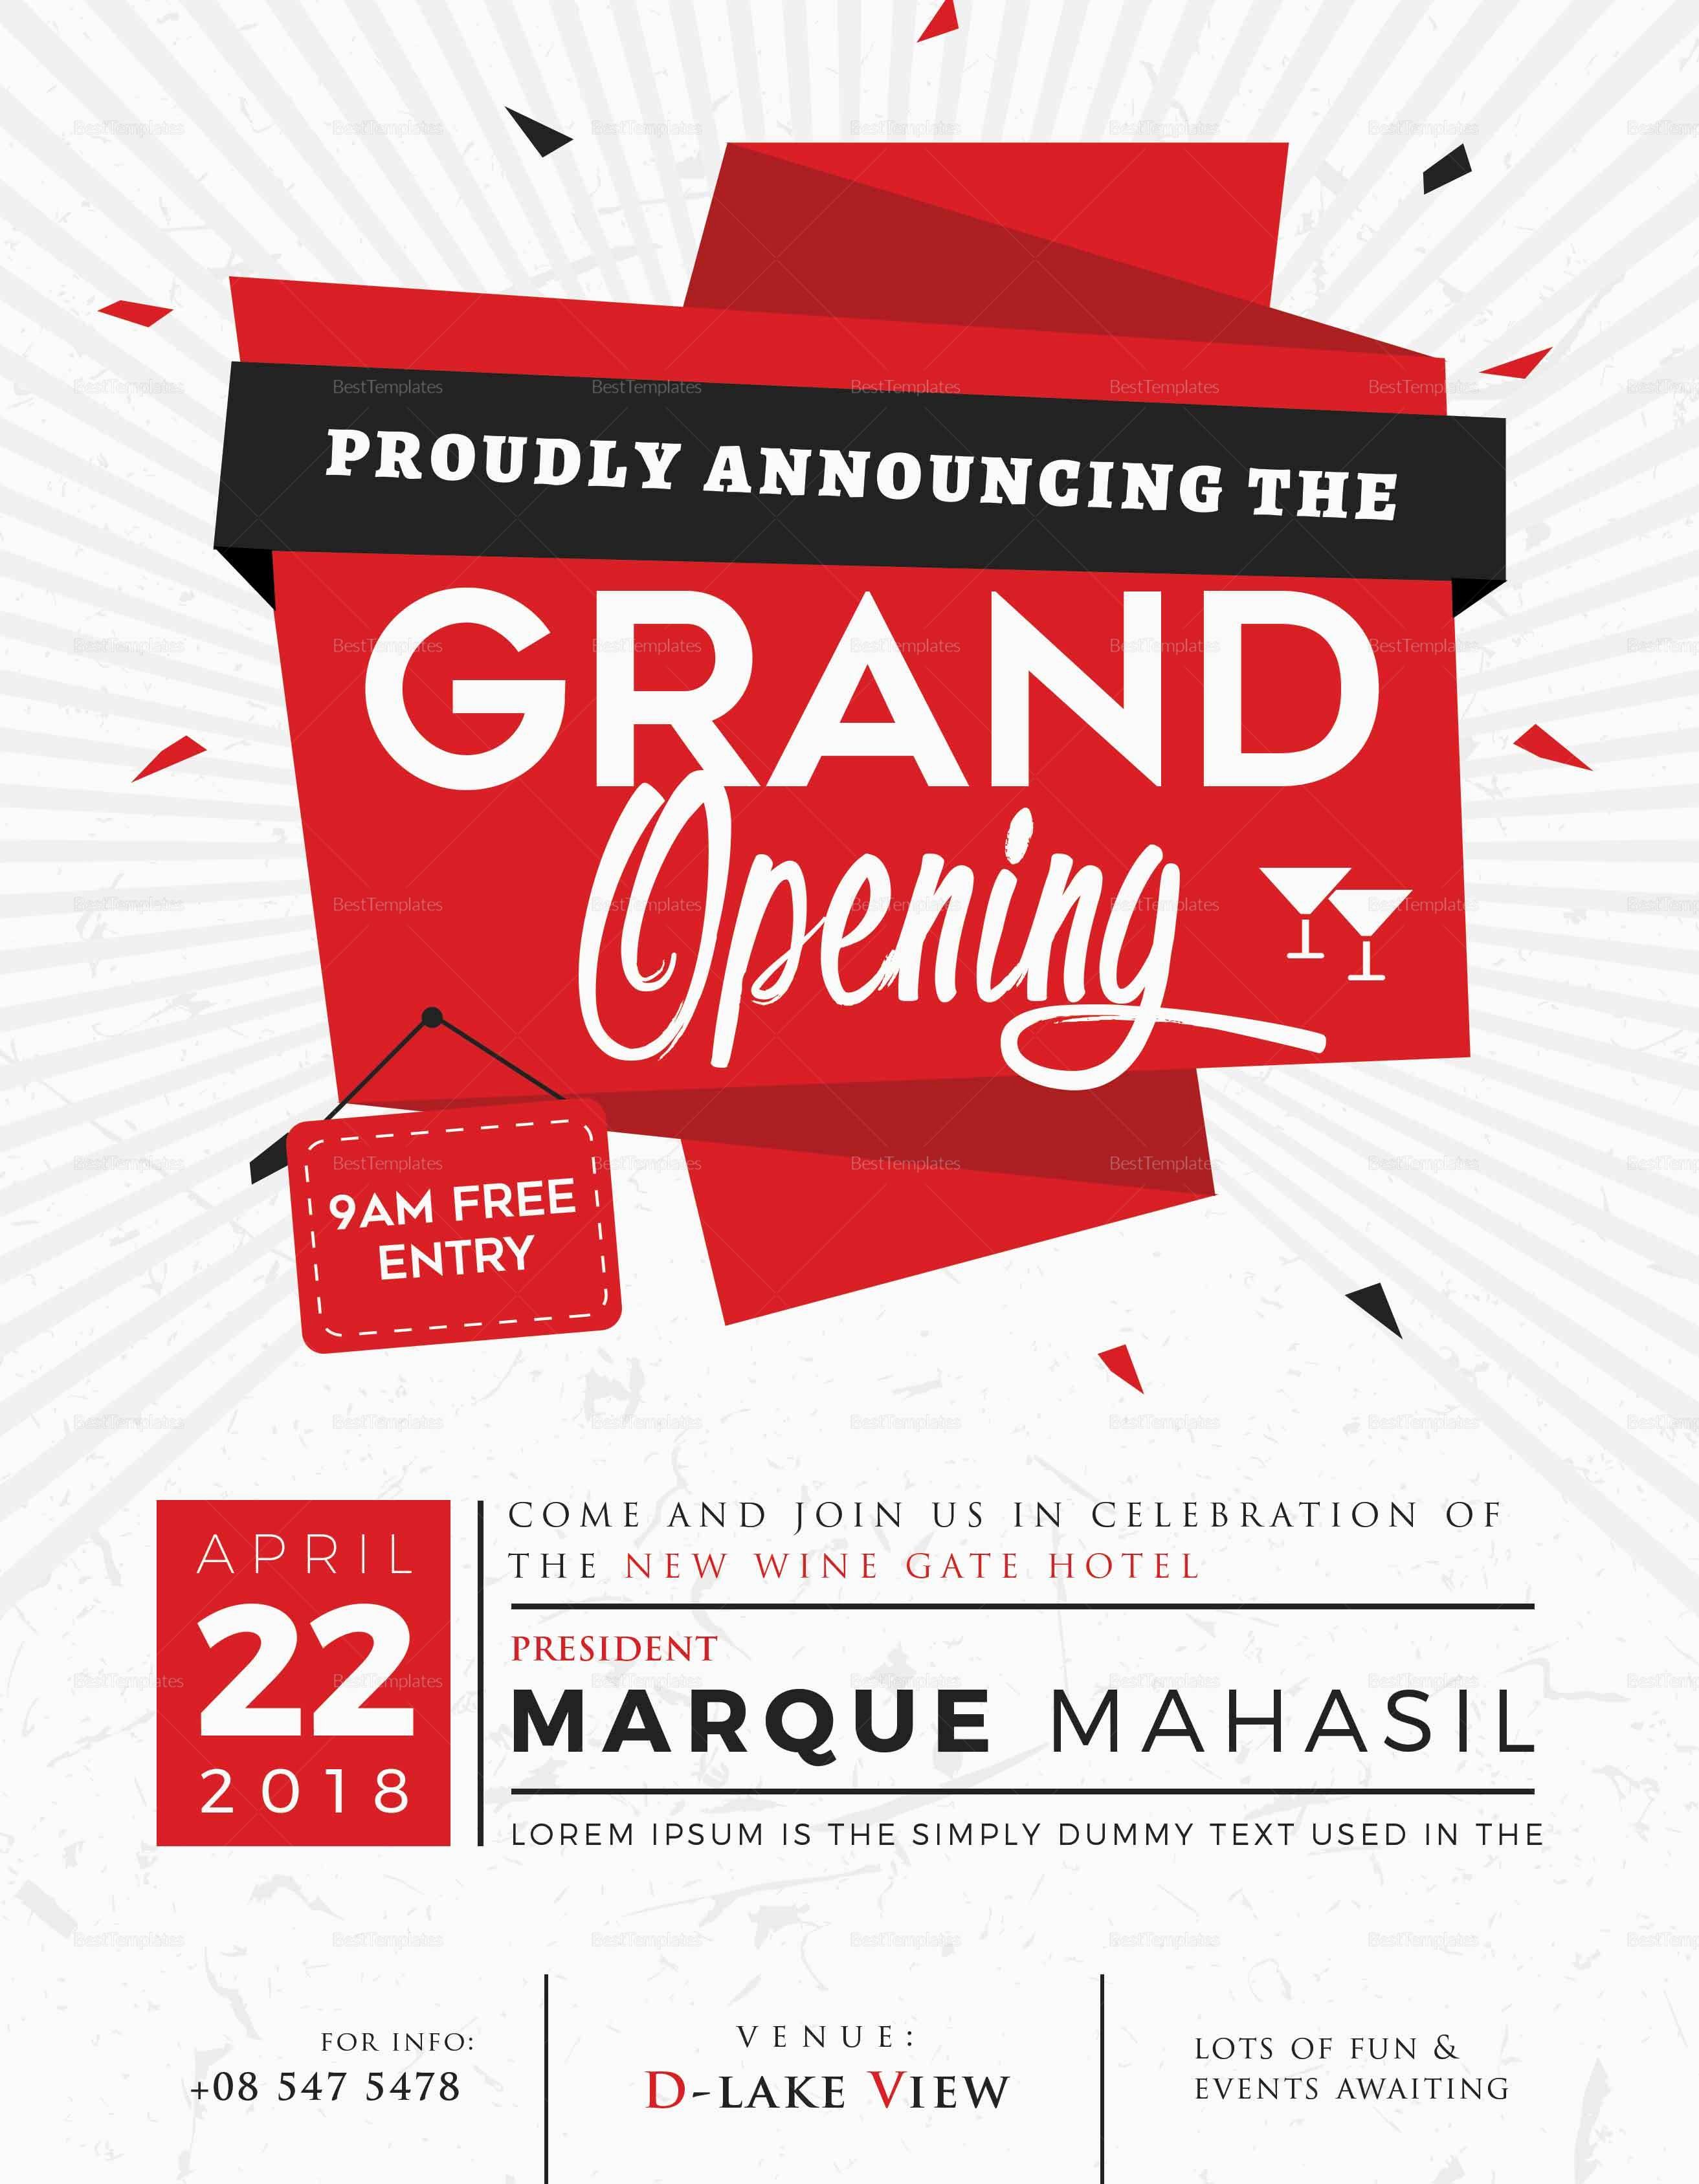 Grand Opening Flyer Template Free Awesome Grand Opening Flyer Design Template In Word Psd